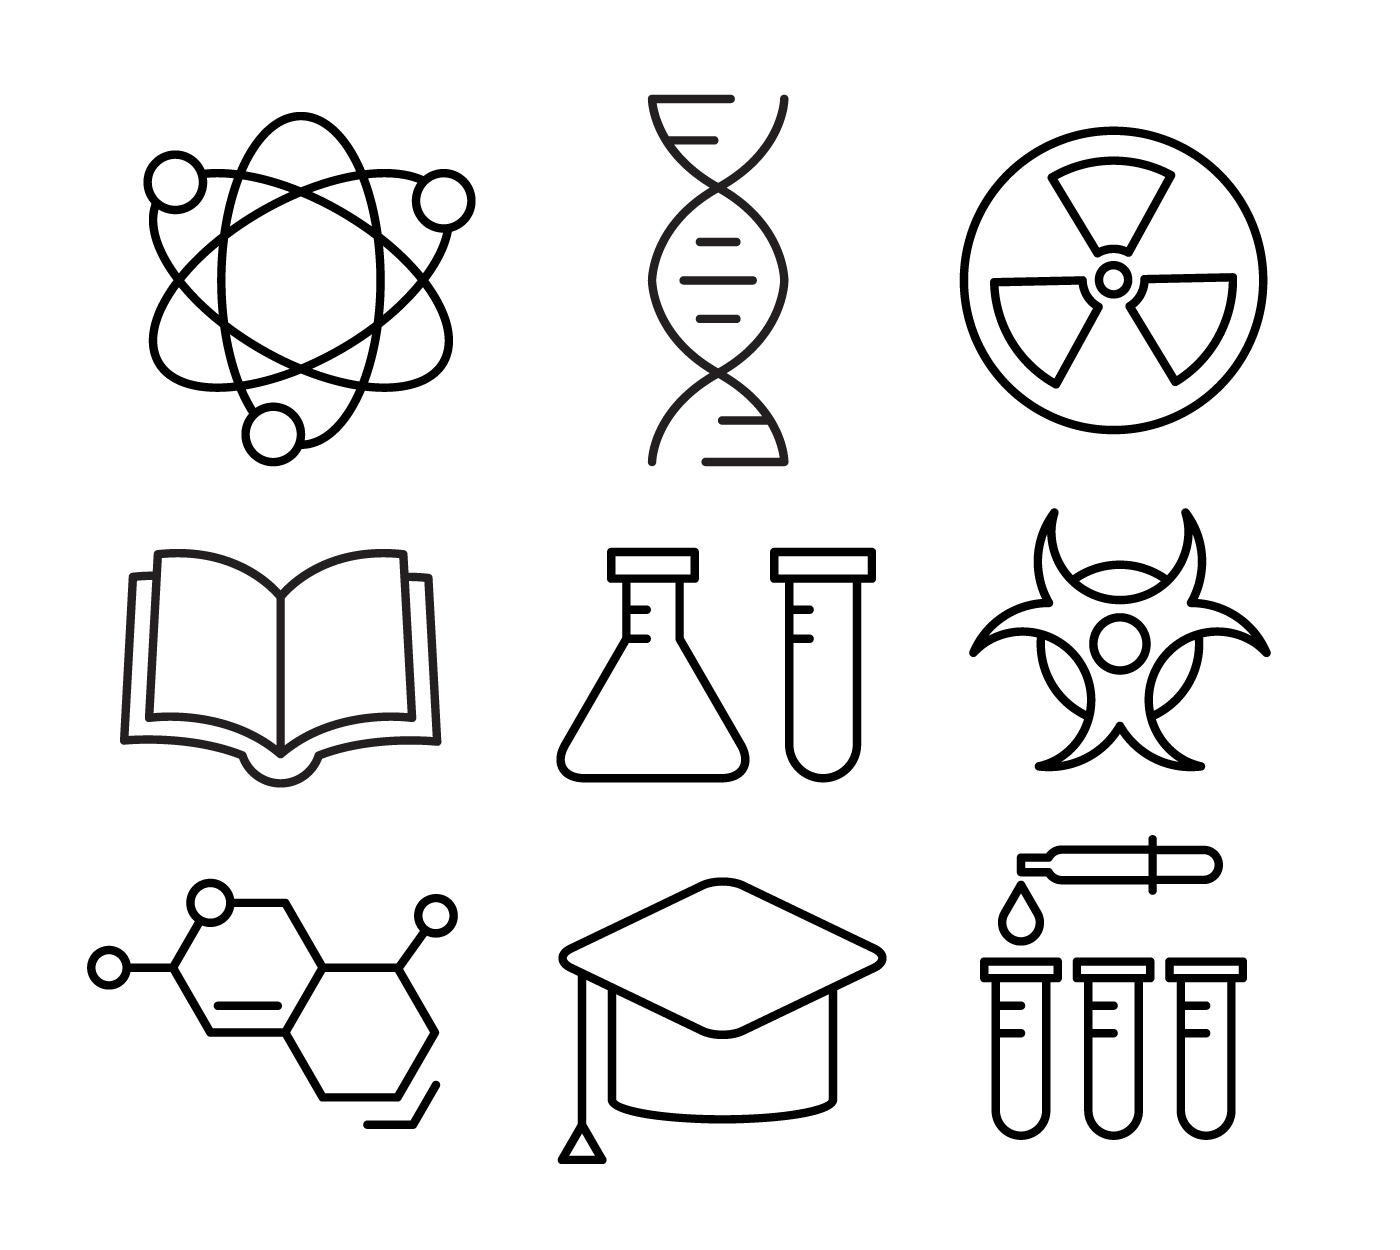 Download Linear Chemistry Icons - Download Free Vector Art, Stock ...